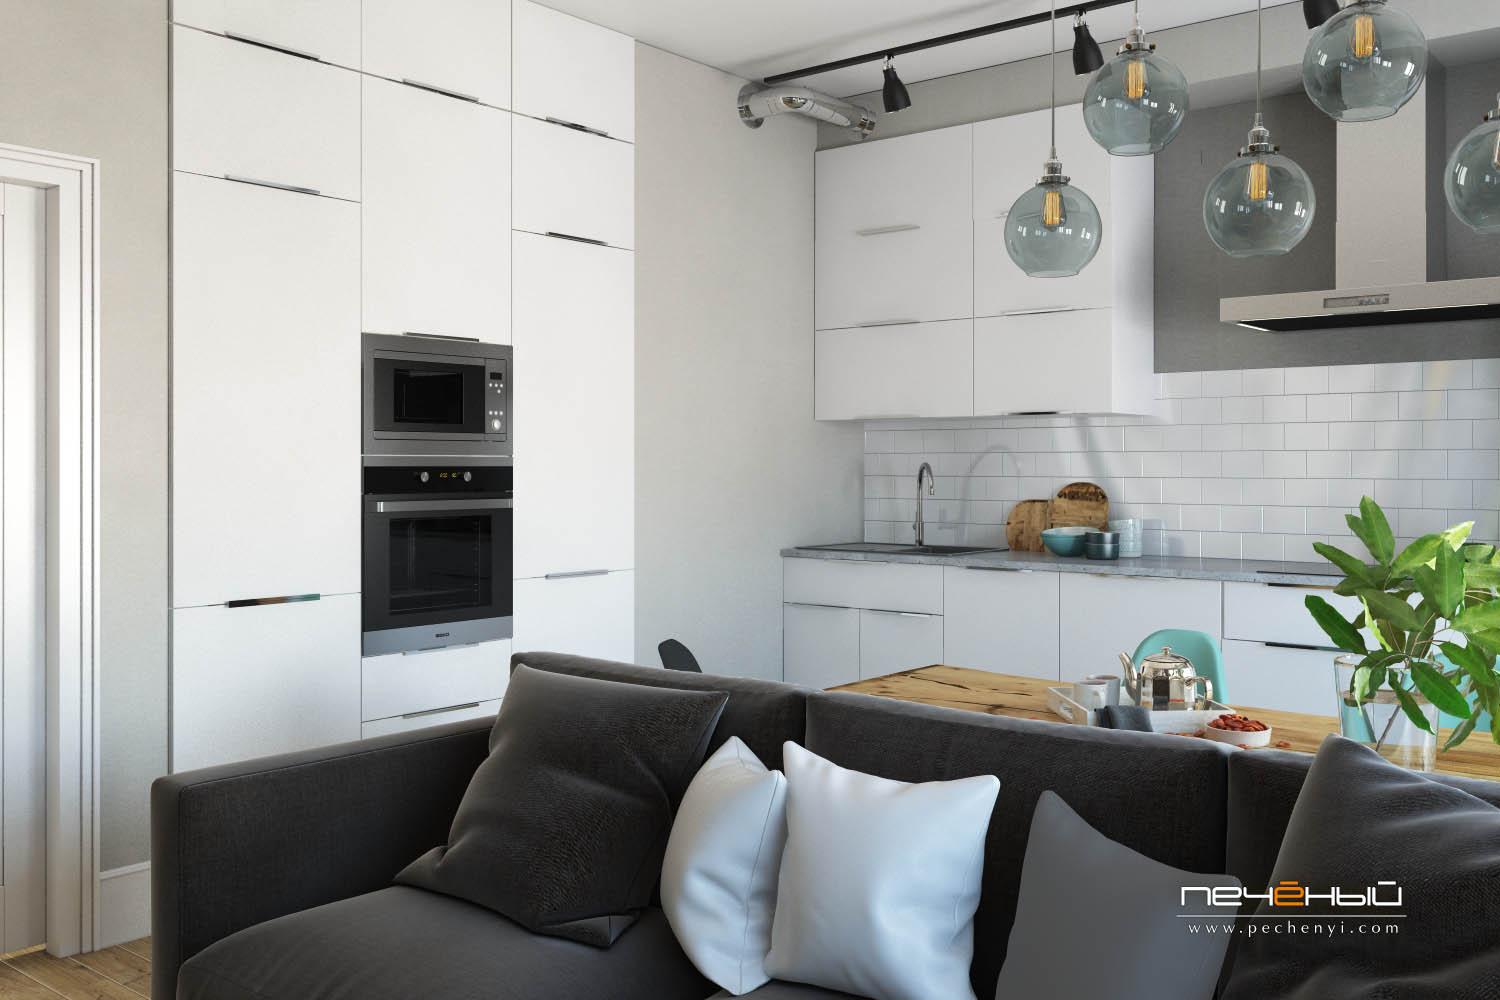 The modern white kitchen in grey and white with subway tiles is fresh and functional, no handle cabinets look neat